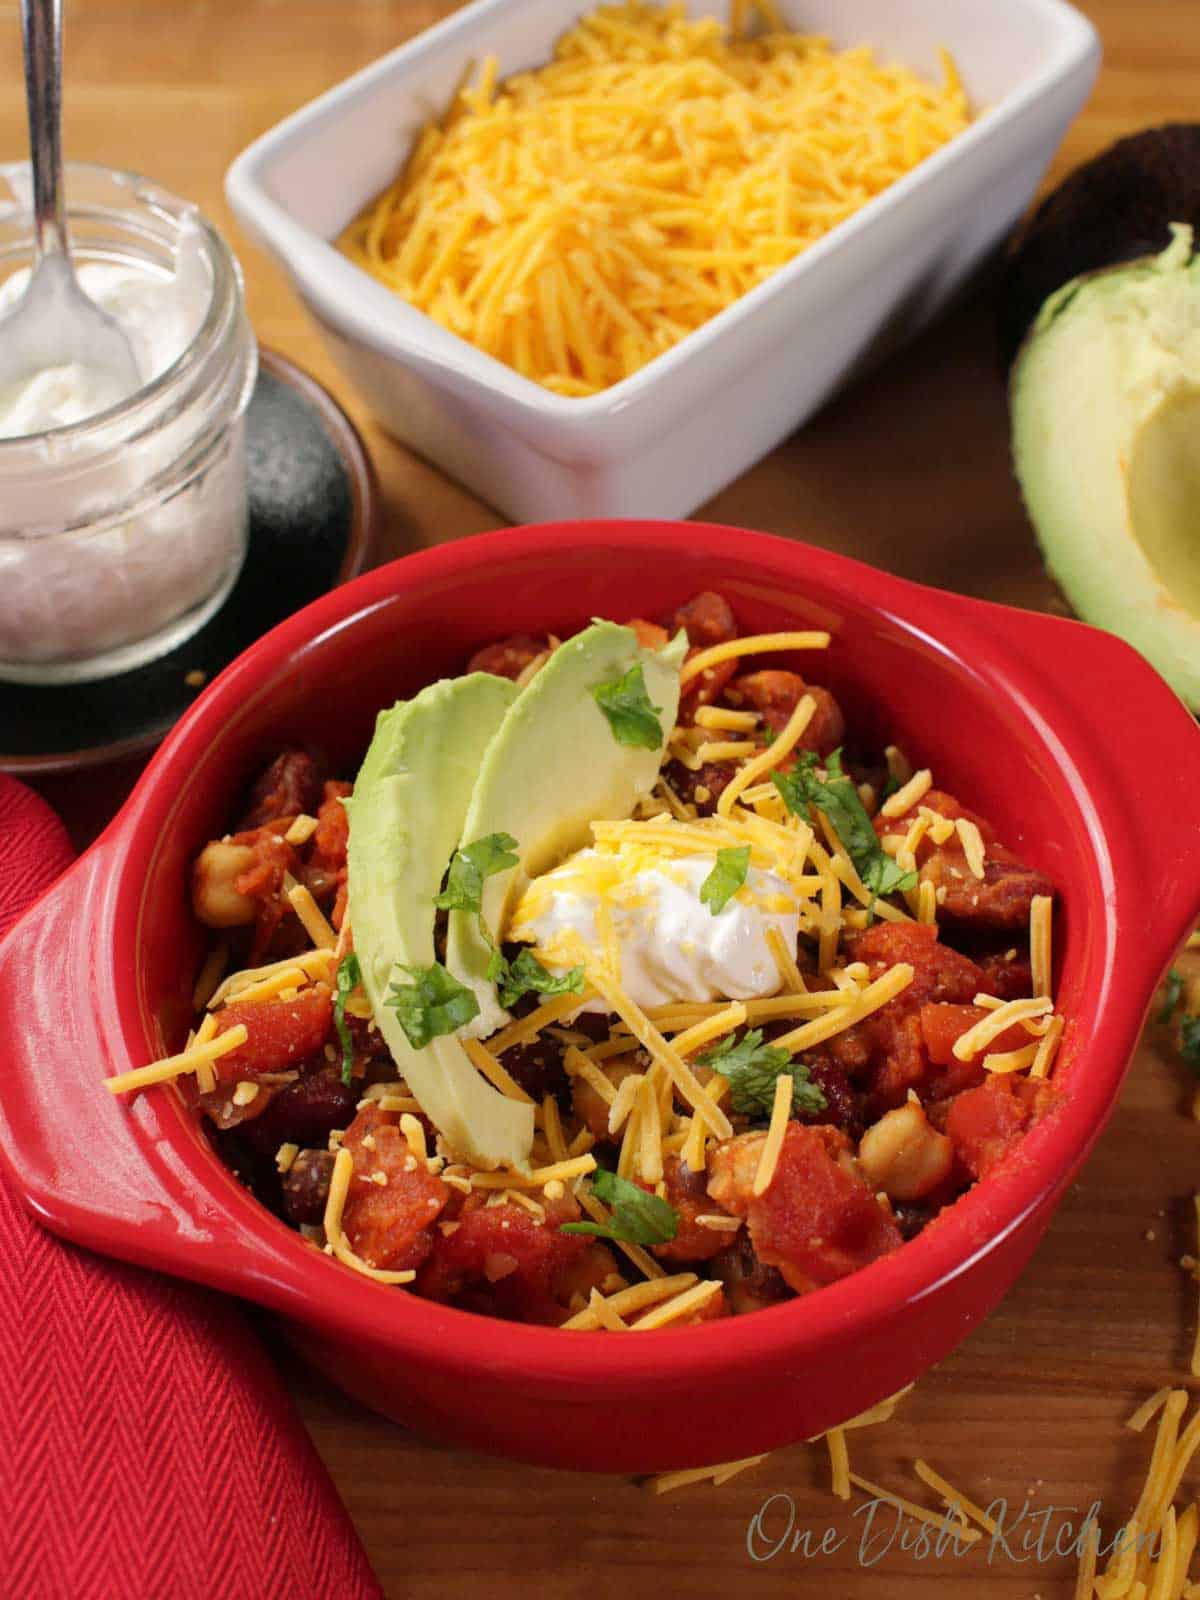 A red circular baking dish full of chili with beans, onions, and tomatoes, topped with two avocado slices, shredded cheese, and a dollop of sour cream, next to a small jar of sour cream, a dish of shredded cheese, and half of an avocado 